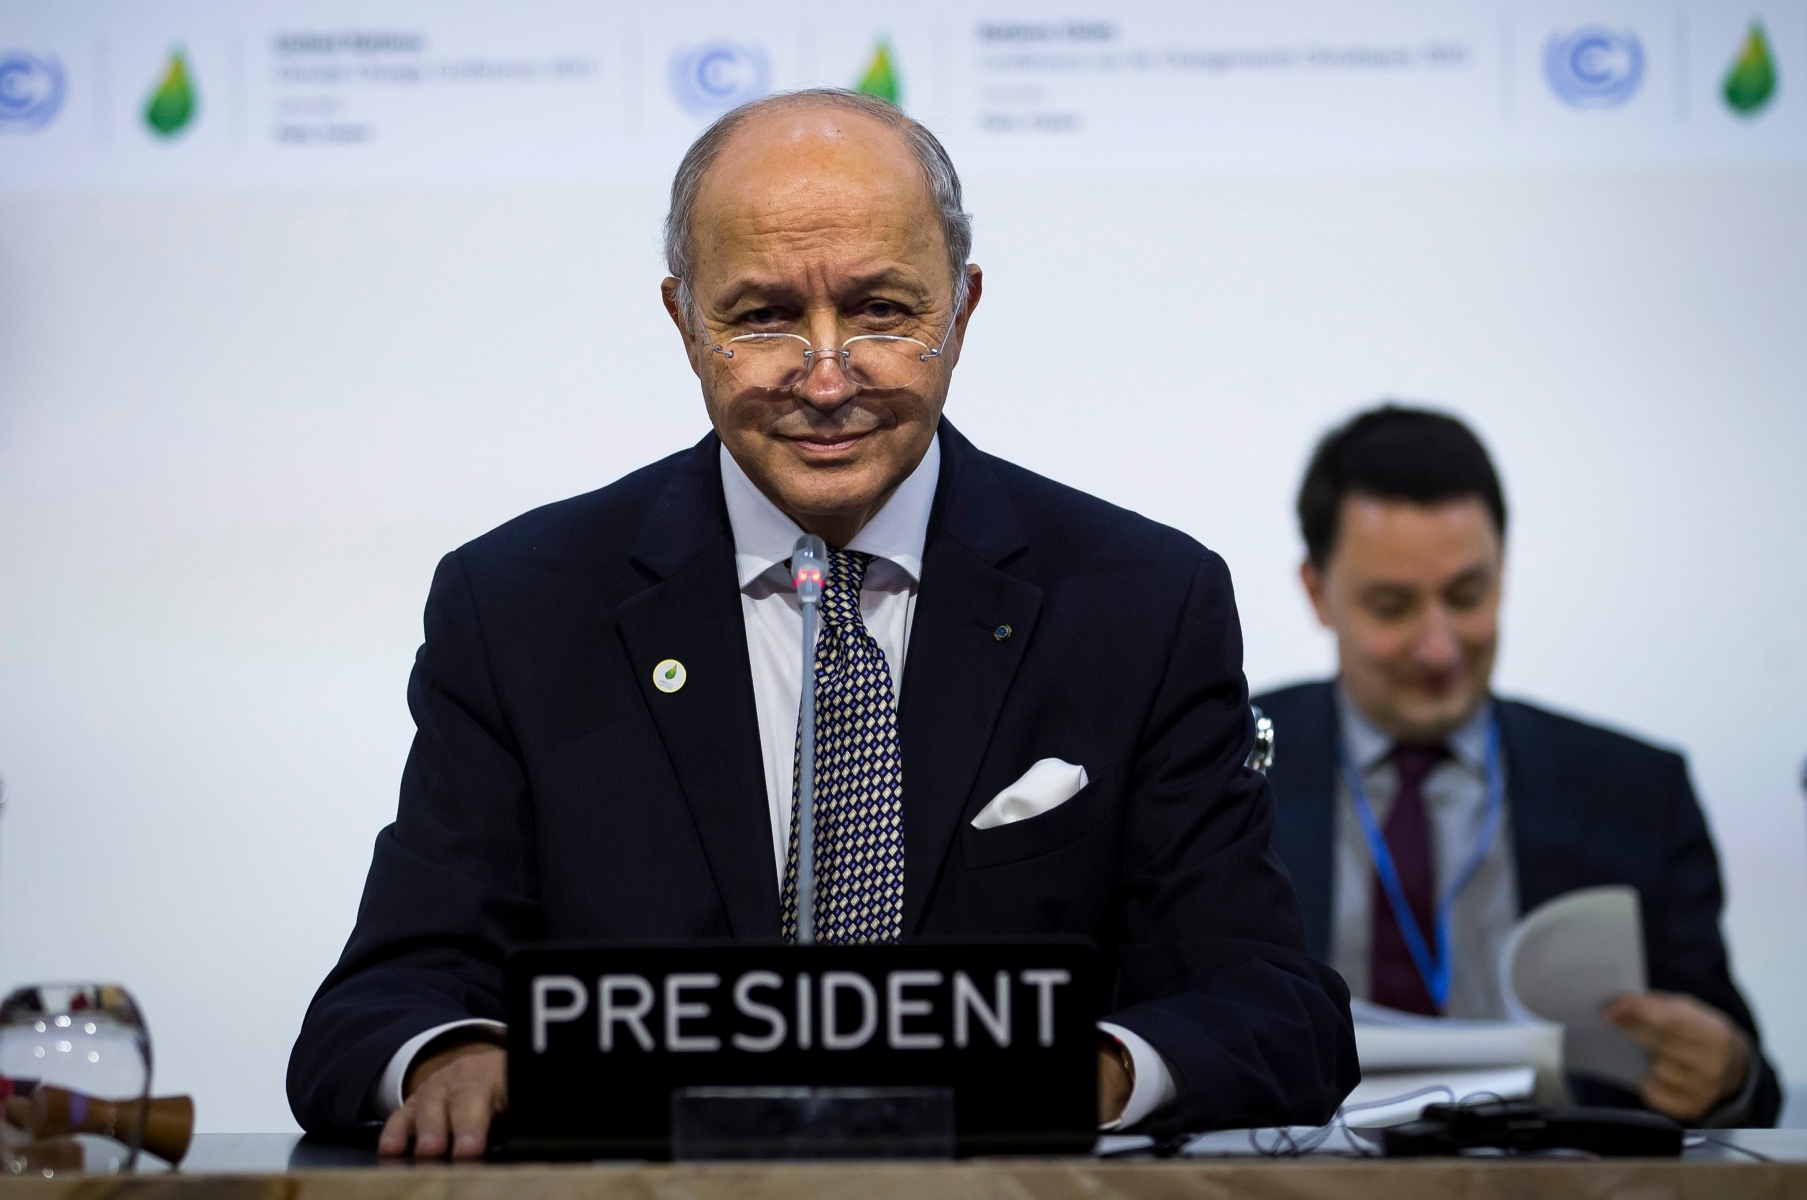 epa05061659 French Foreign affairs minister and acting president of the COP21, Laurent Fabius hosts the 'Committee of Paris' plenary work session at 'the COP21 Climate Conference in Le Bourget, north of Paris, France, 09 December 2015. The 21st Conference of the Parties (COP21) is held in Paris from 30 November to 11 December aimed at reaching an international agreement to limit greenhouse gas emissions and curtail climate change.  EPA/IAN LANGSDON FRANCE COP21